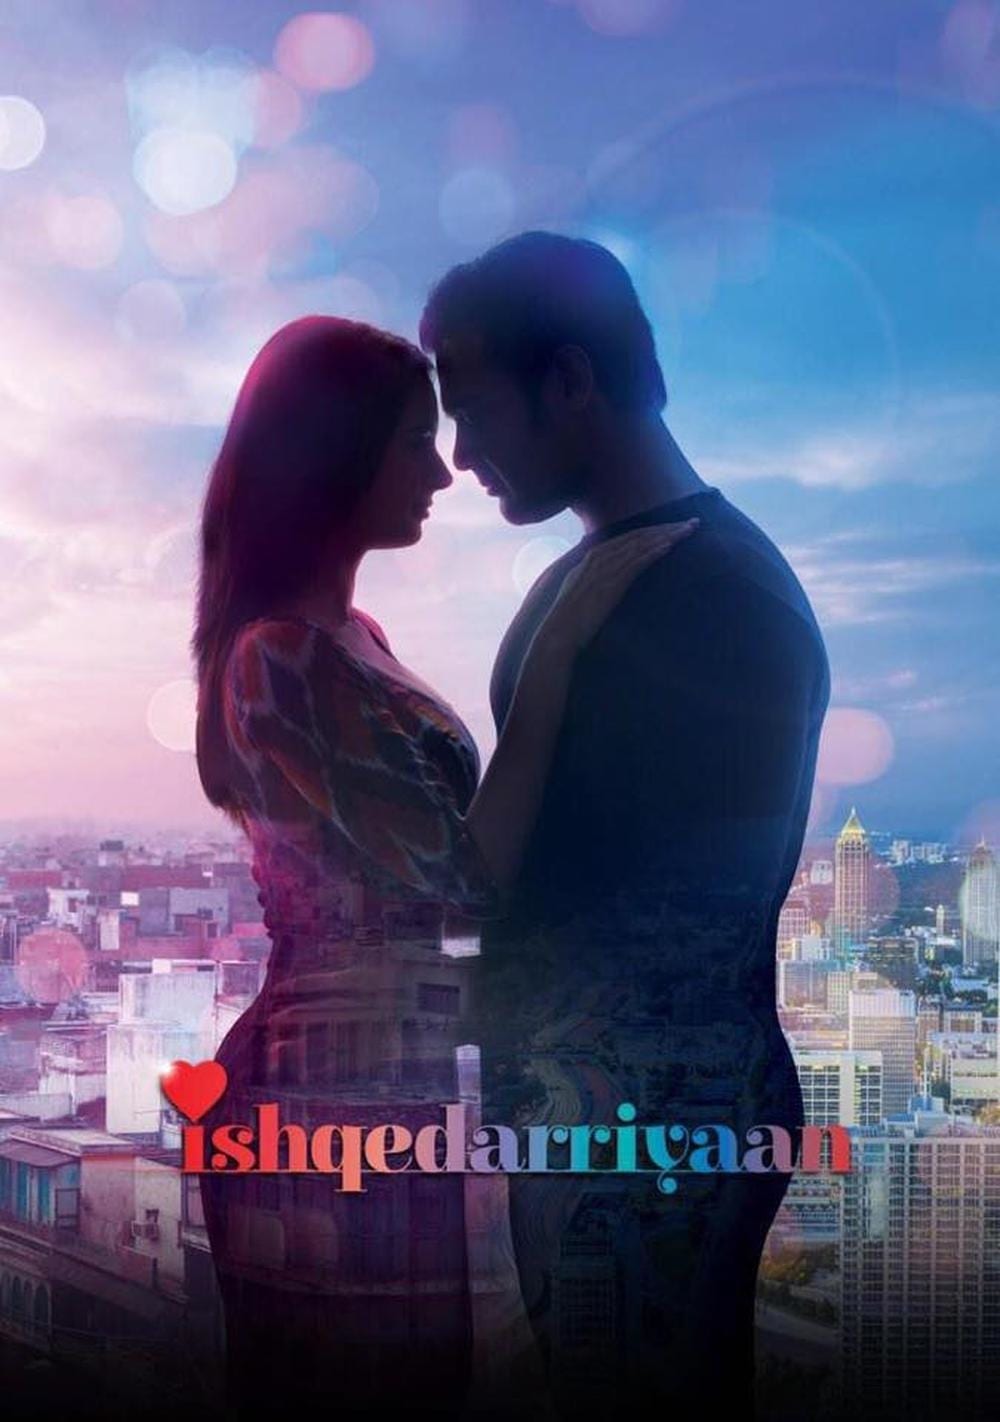 Poster for the movie "Ishqedarriyaan"